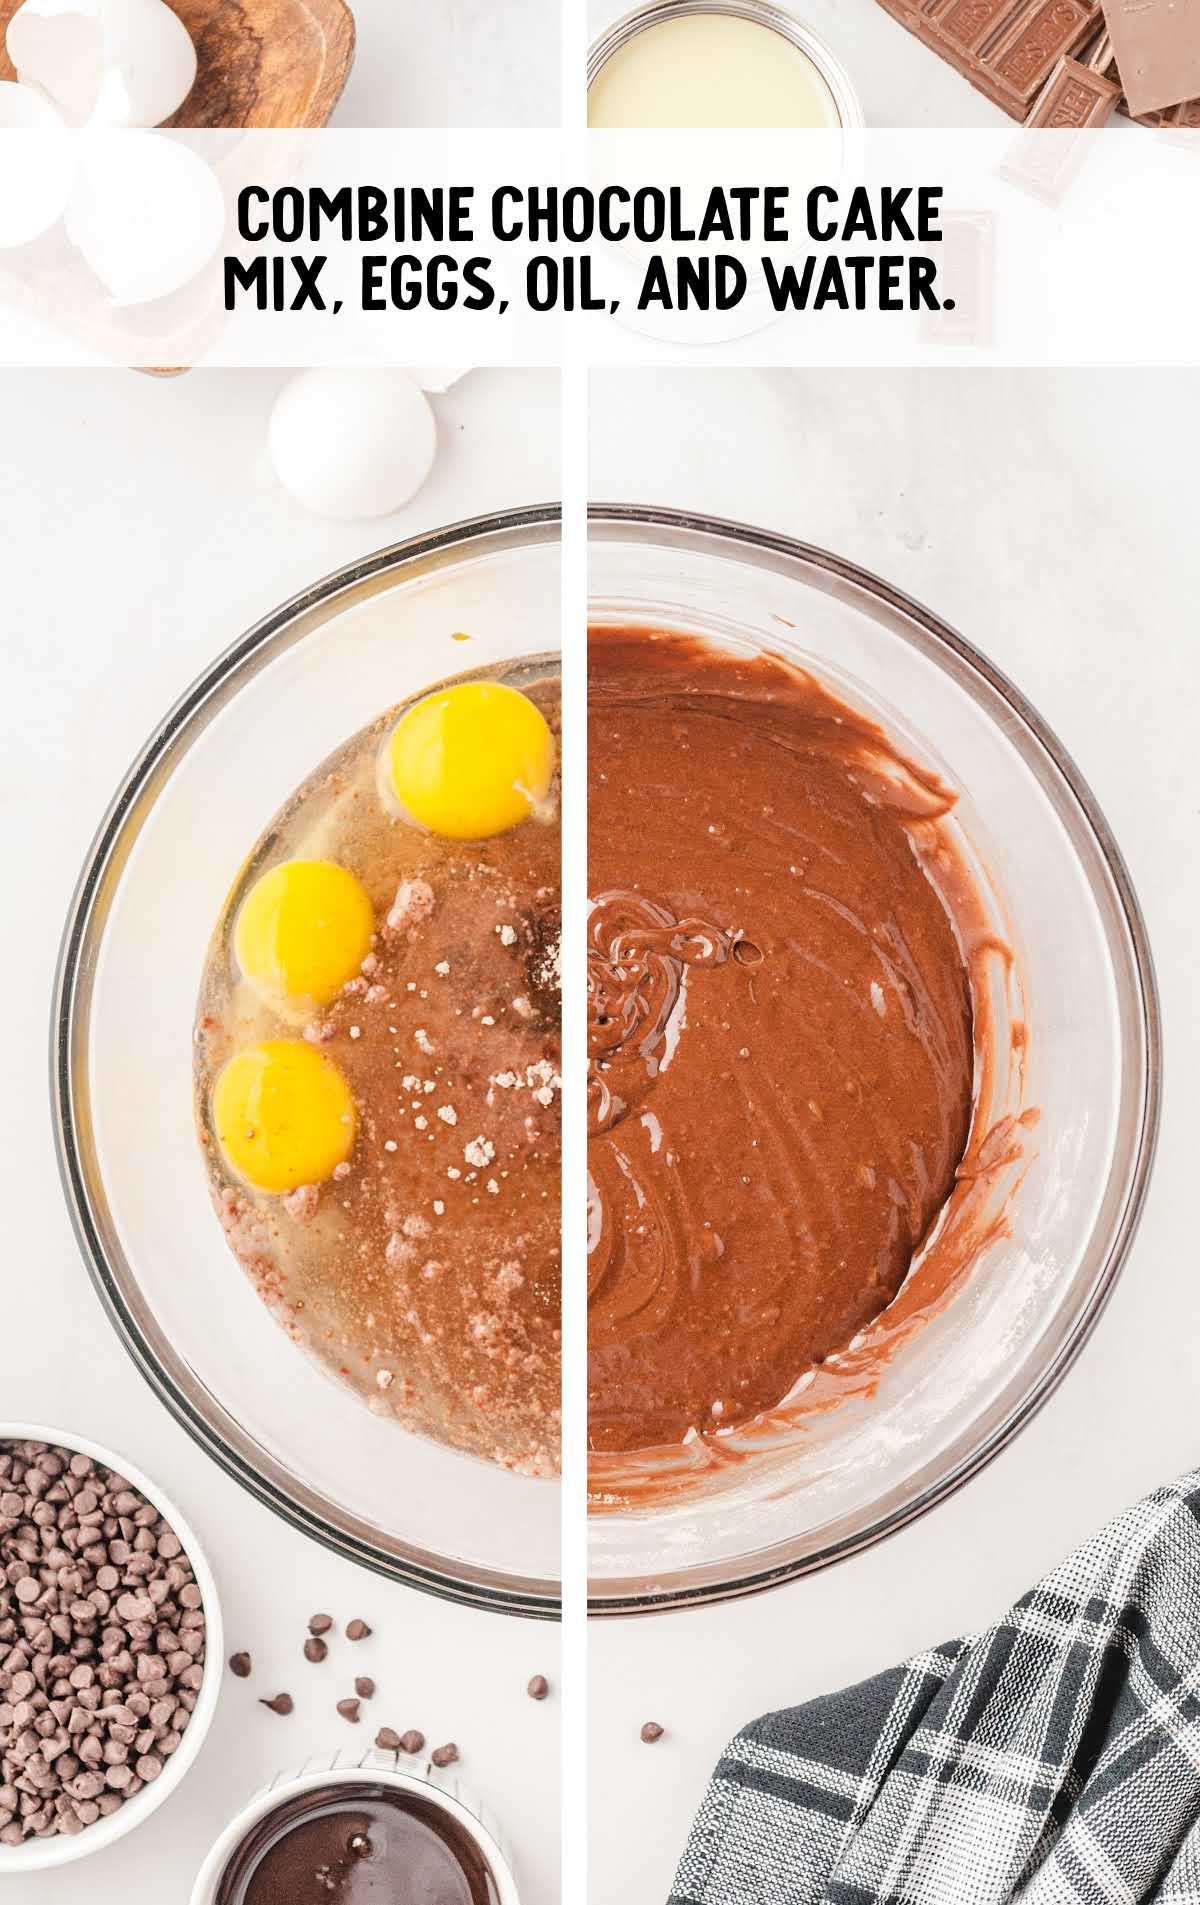 chocolate cake mix, eggs, oil, and water combined in a bowl